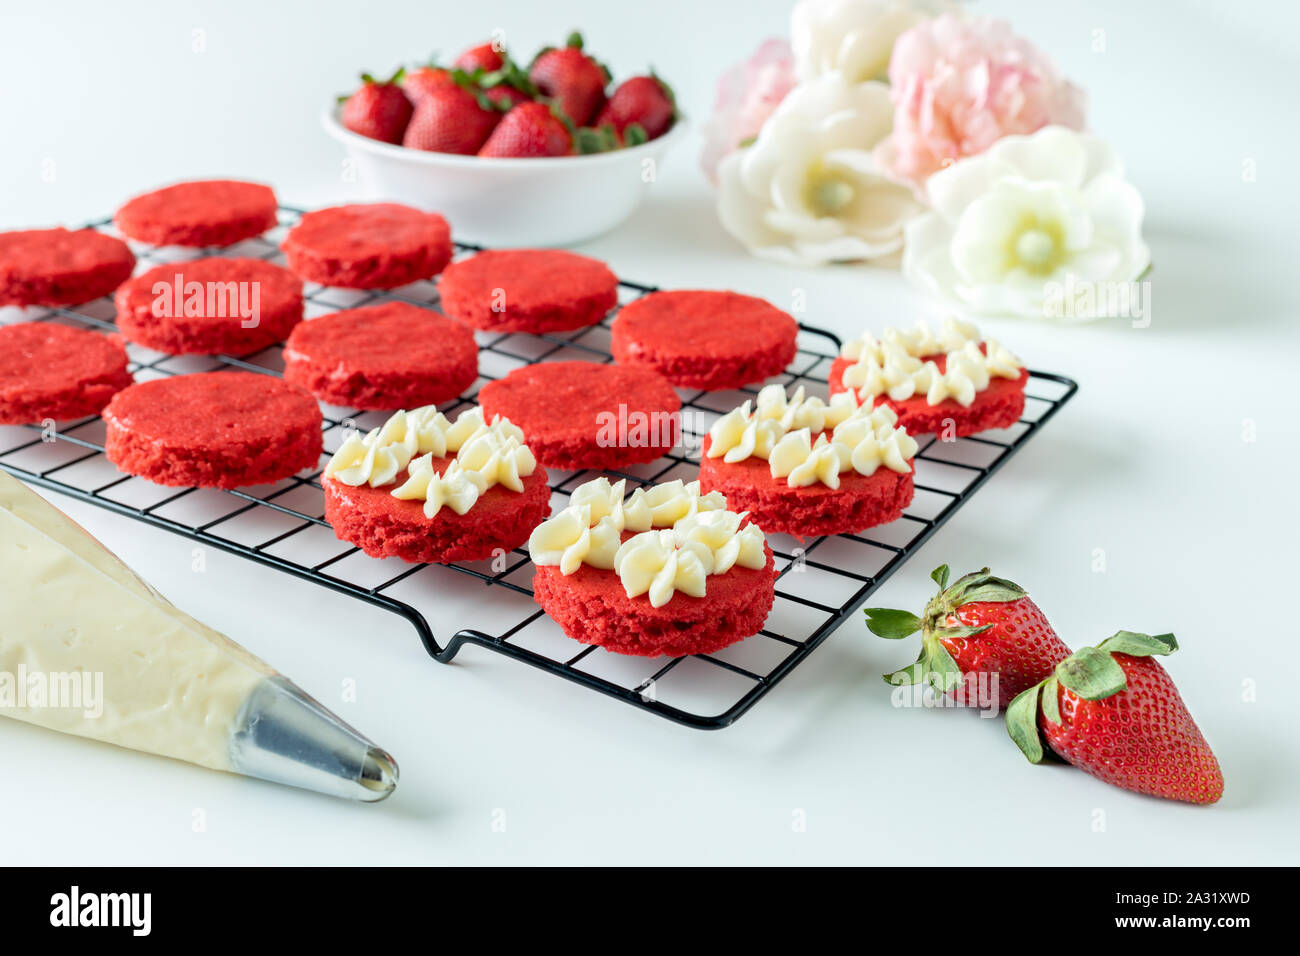 Miniature Red Velvet Cakes with cream cheese frosting and fresh strawberry topping on a cooling rack Stock Photo